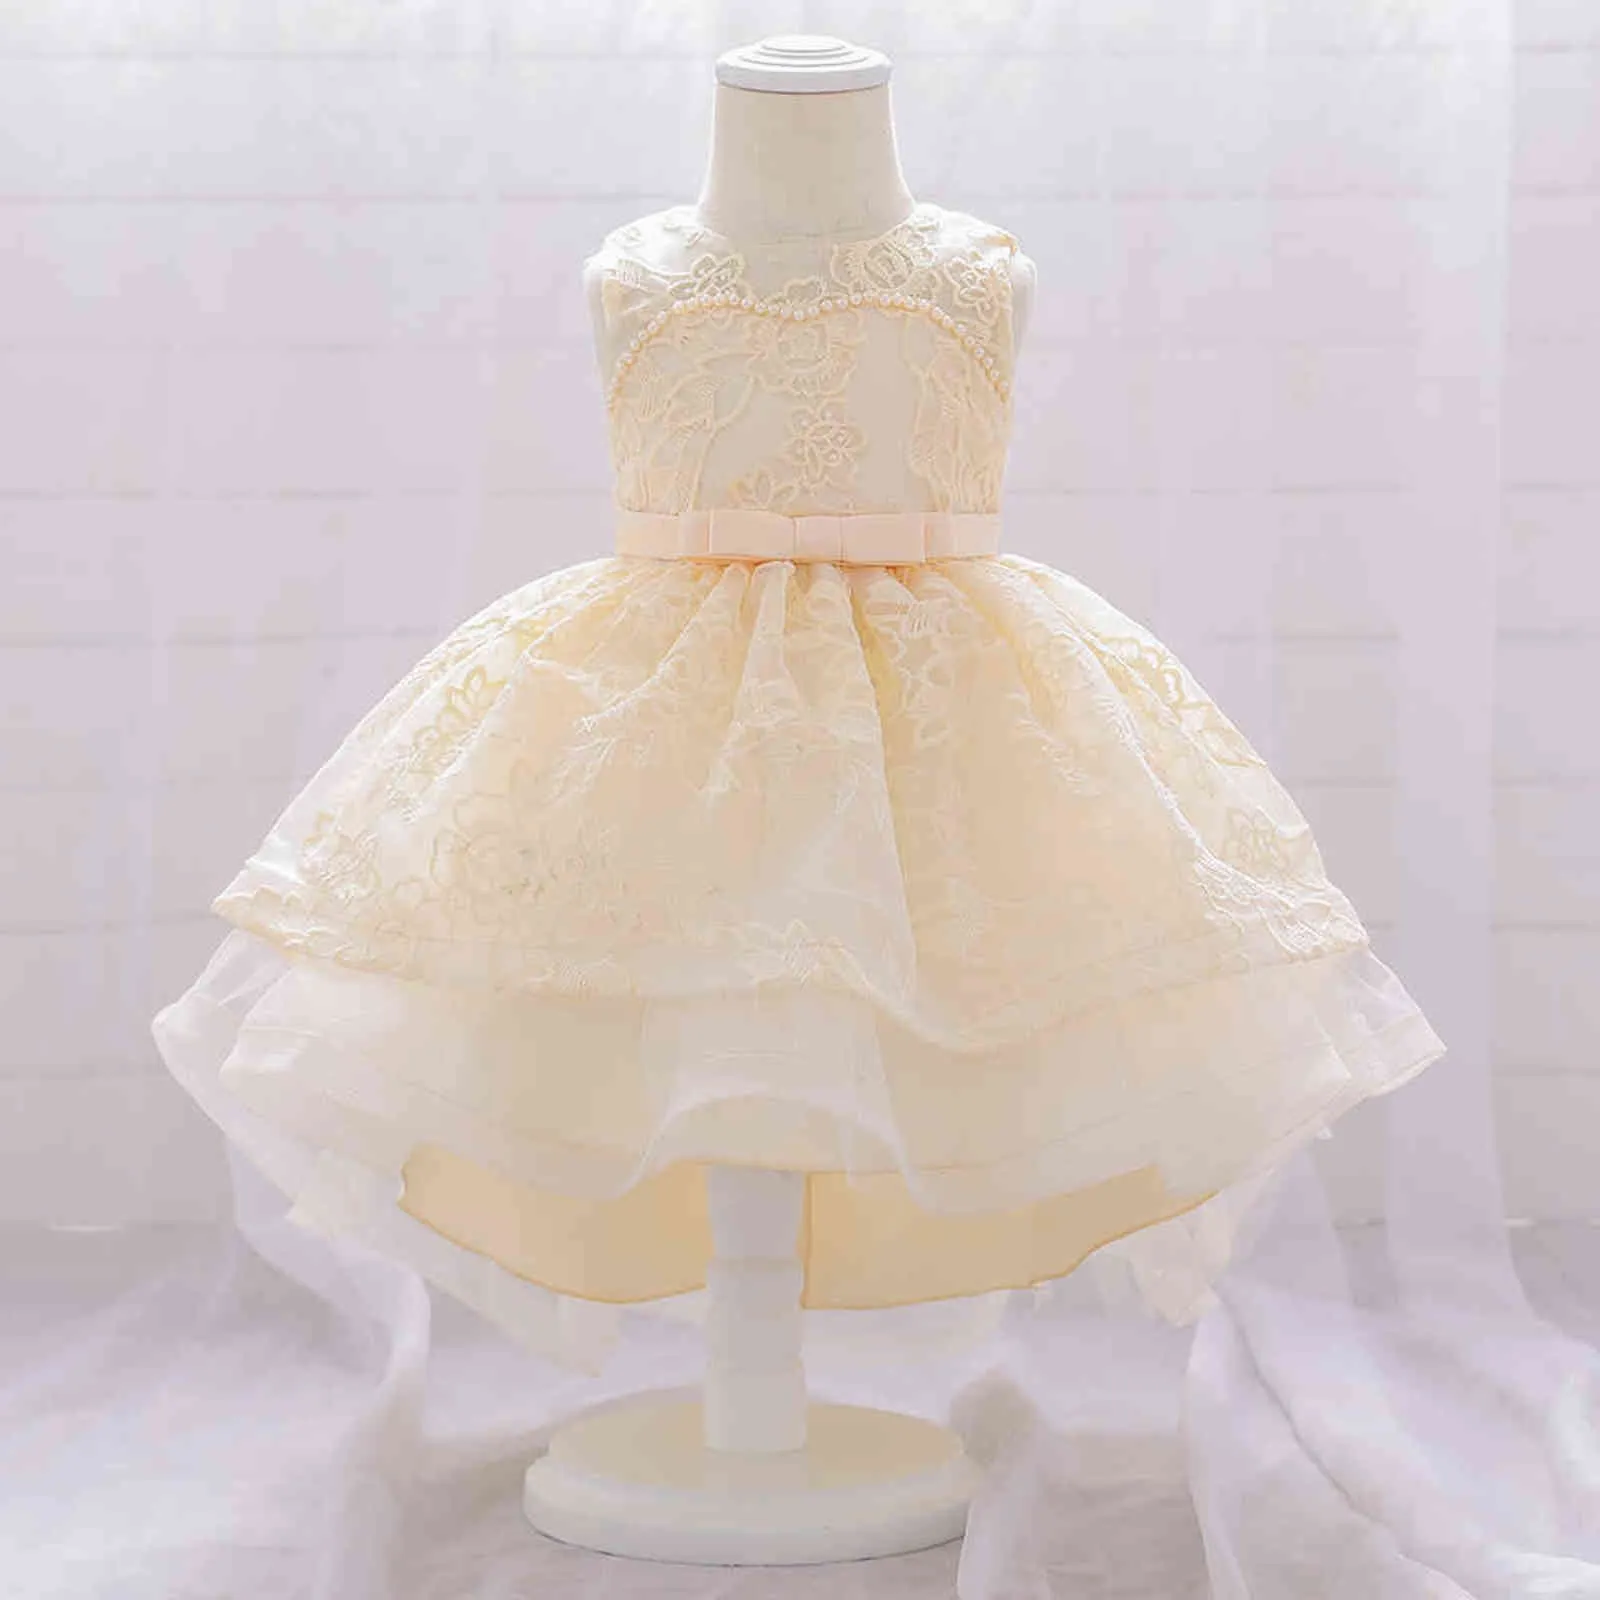 Infant Trailing White Baby Girls Christening Gowns Dresses Newborn Baby Baptism Clothes Princess Lace 1st Year Birthday Dress G1129